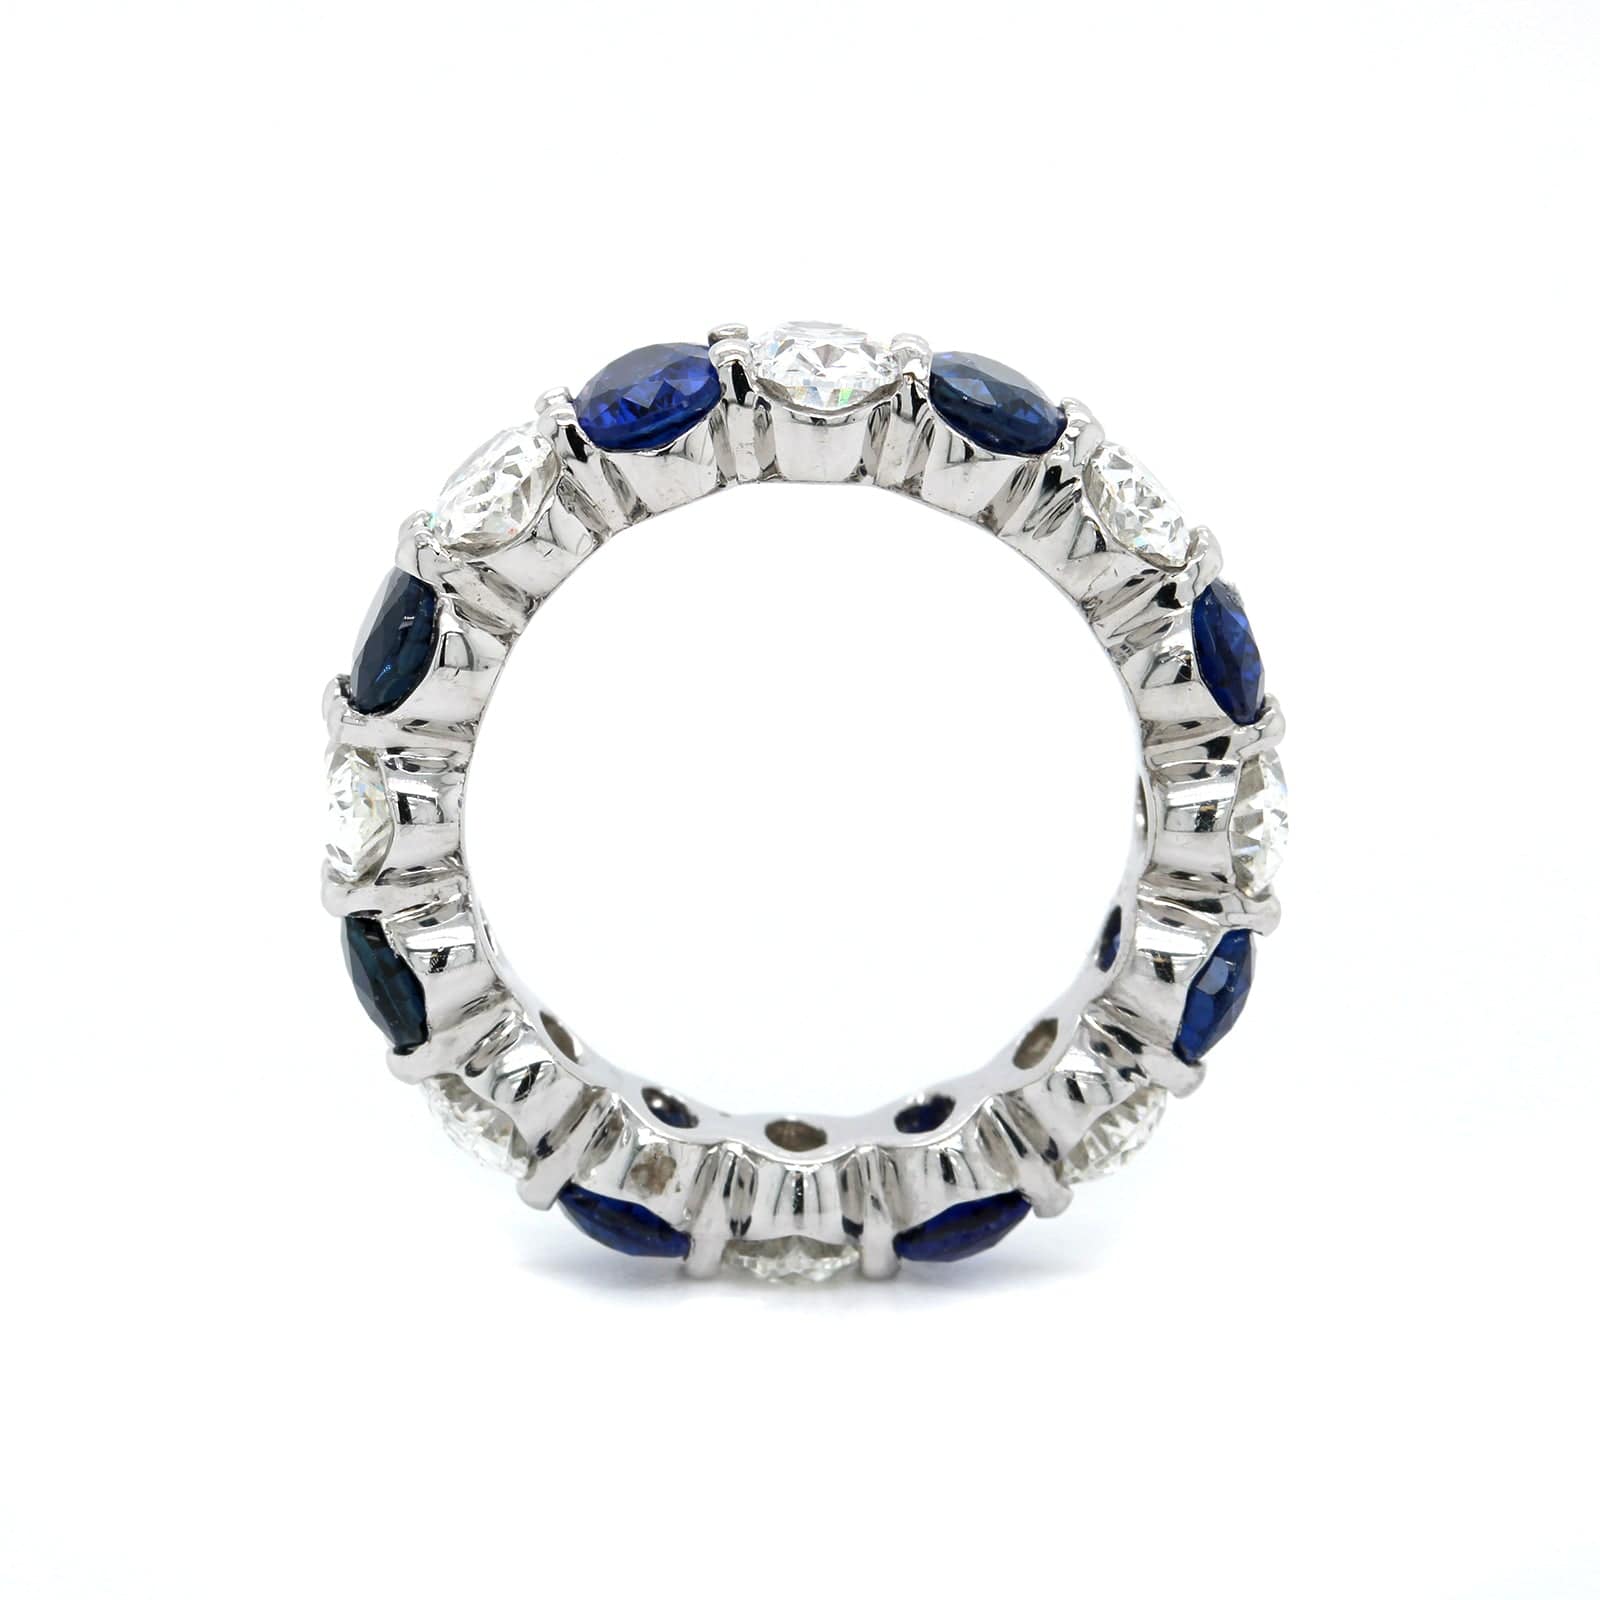 Platinum Shared Prong Alternating Oval Diamond and Sapphire Eternity Band